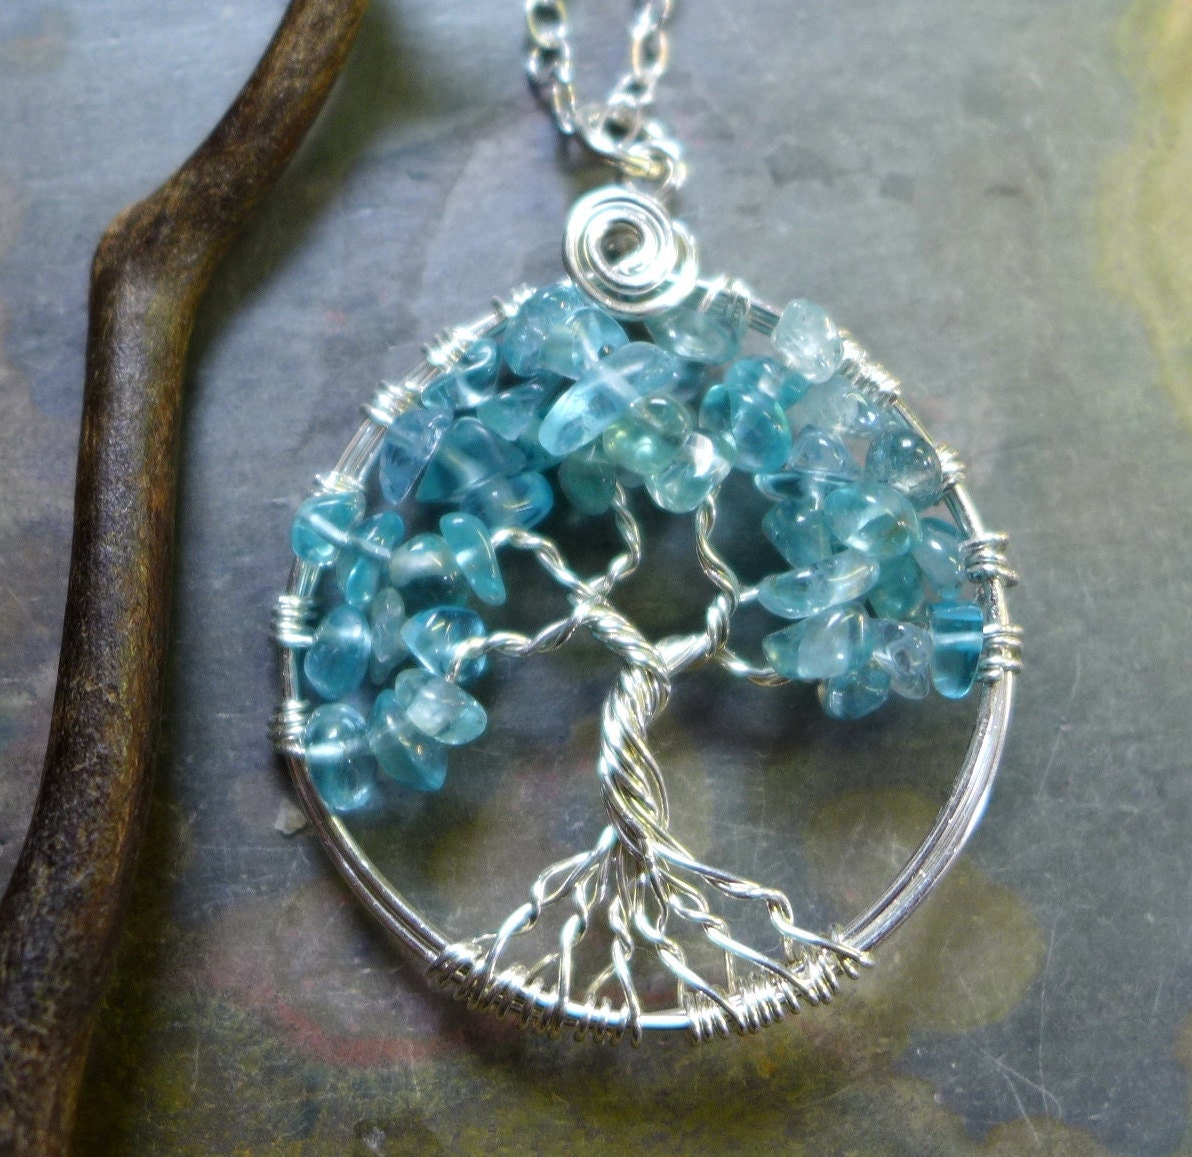 Aquamarine/Apatite Necklace in Sterling Silver, March Tree of Life Necklace, Aquamarine /Apatite Tree of Life Necklace in Silver